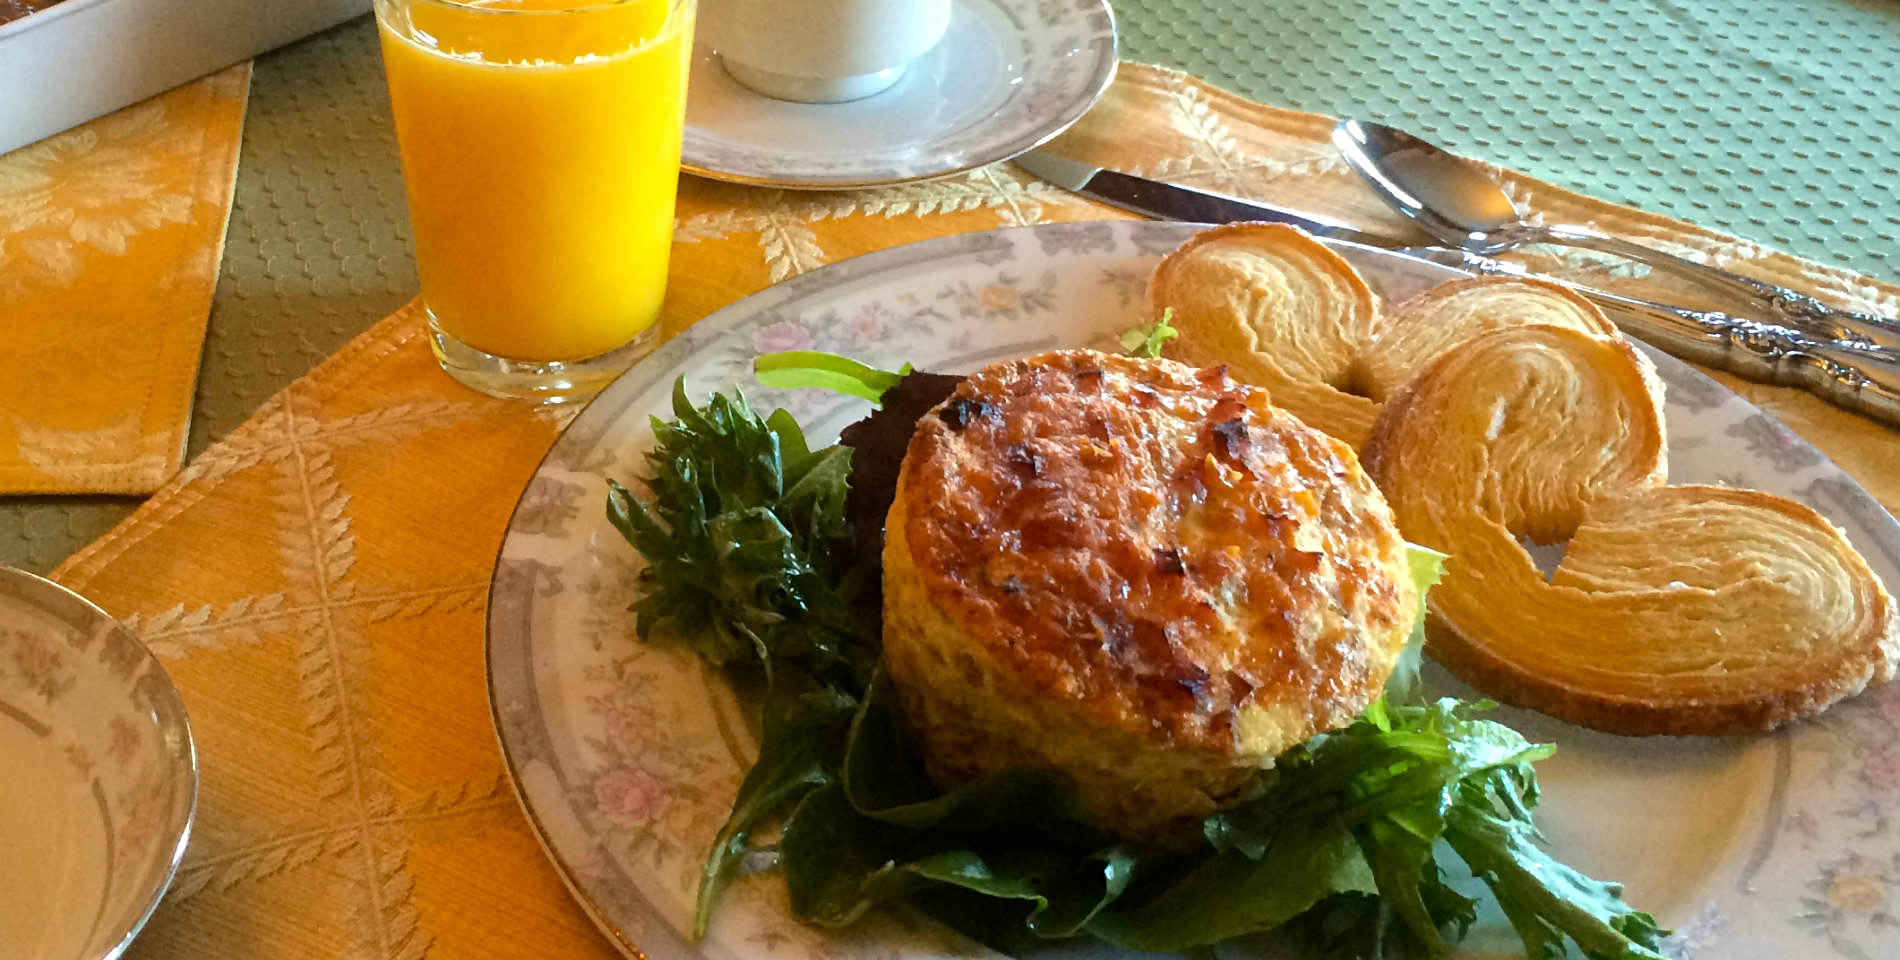 An omelette served with a bed of greens and two pastries with a glass of orange juice. 